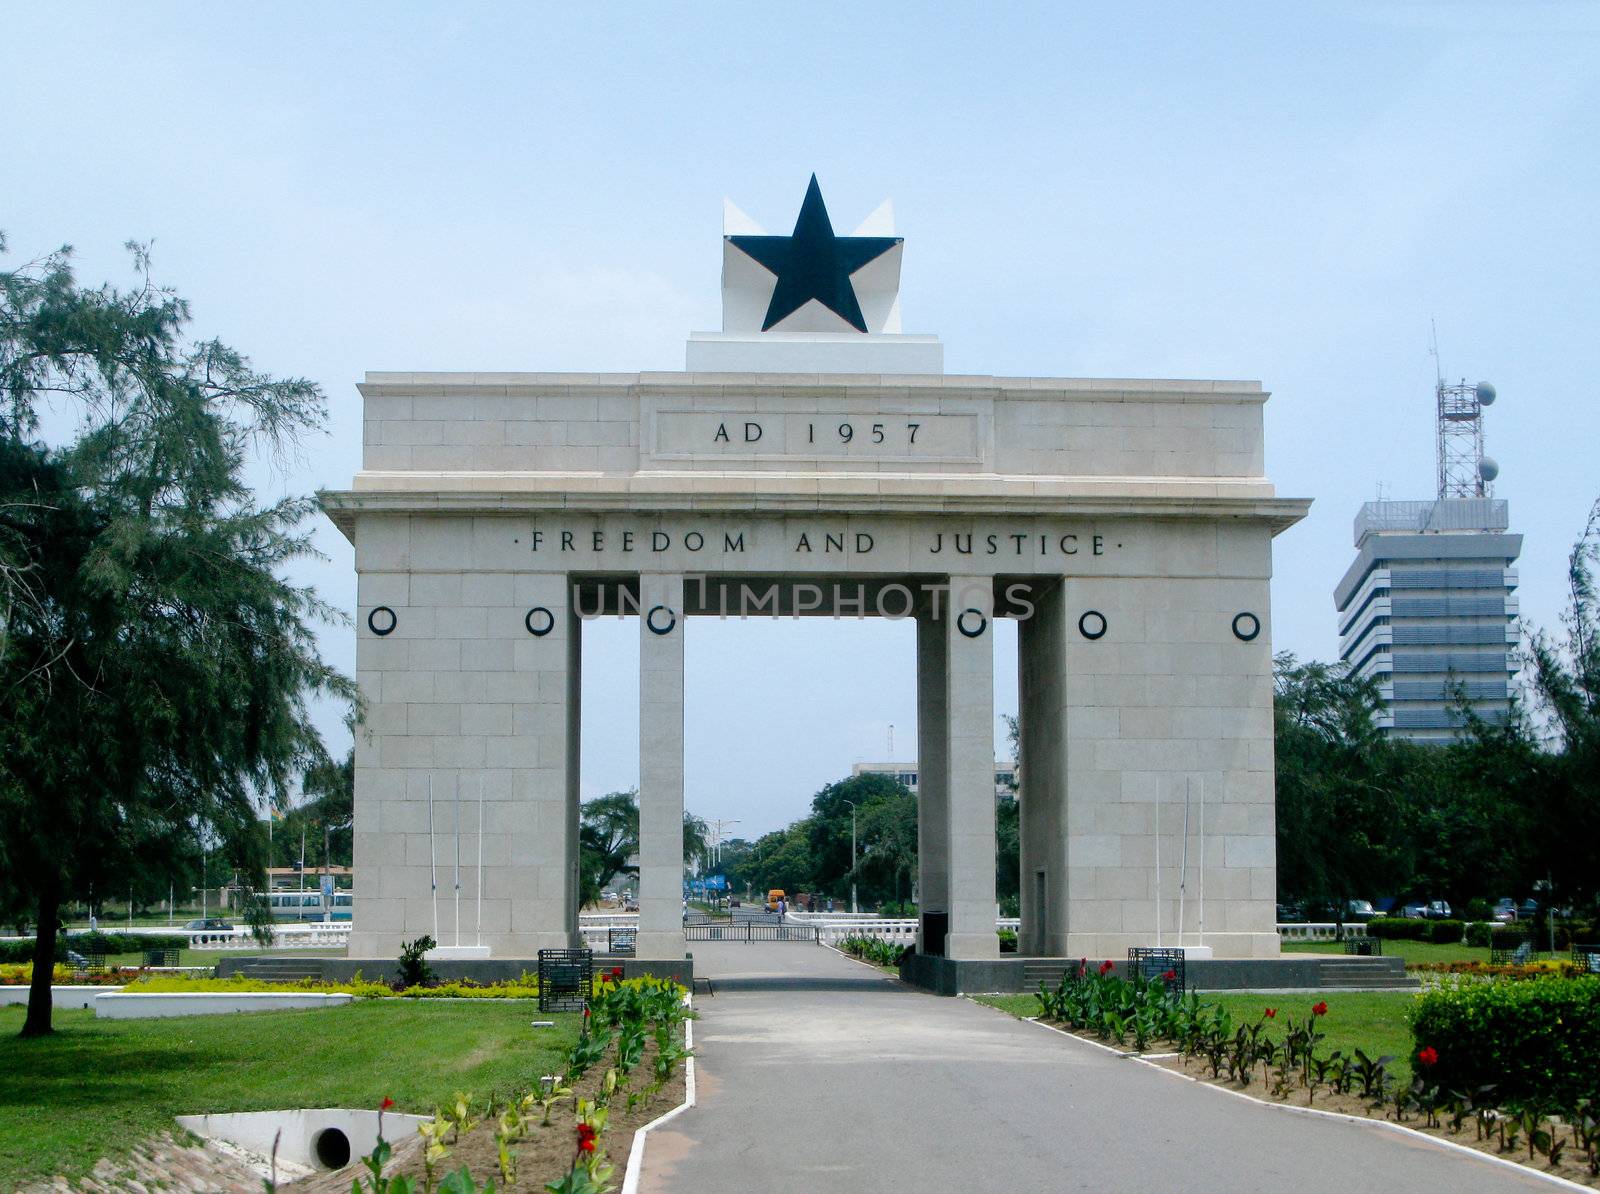 Freedom and Justice Arch in Accra in Ghana by steheap